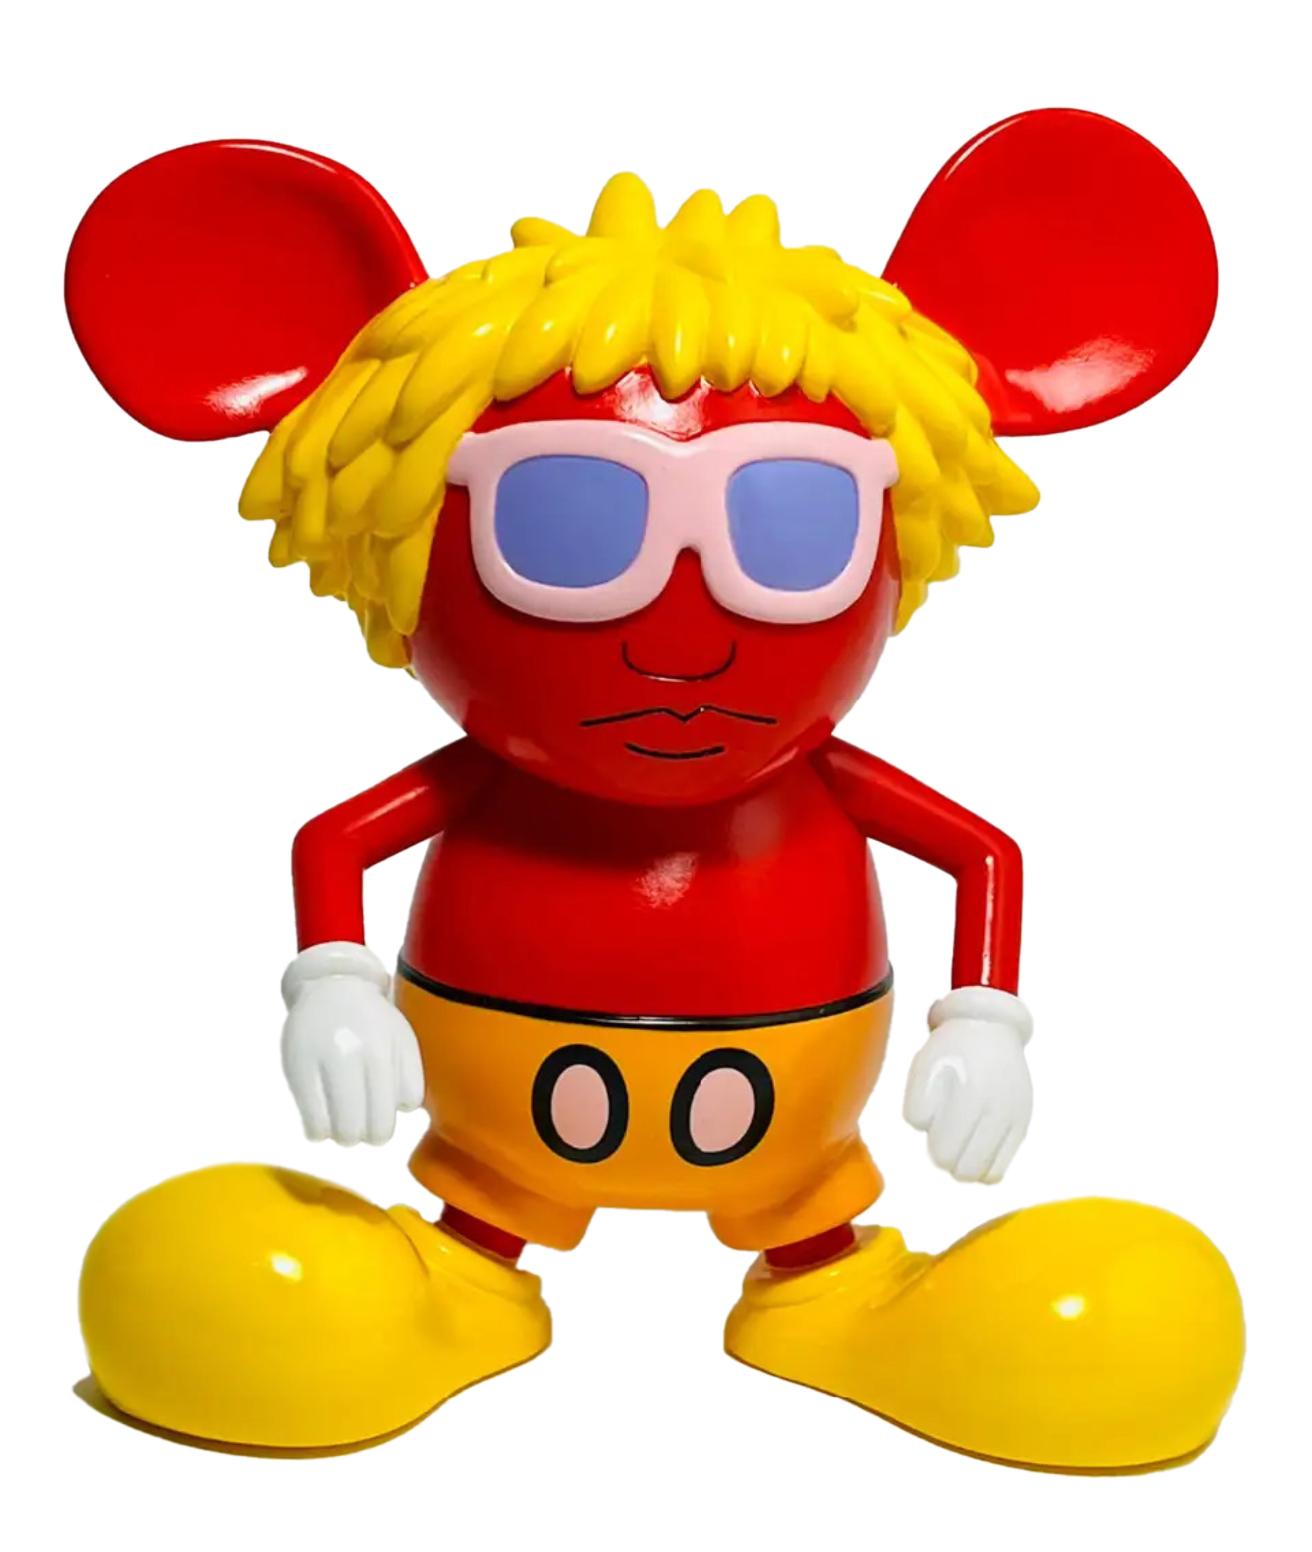 Keith Haring Andy Mouse art toy (Keith Haring Andy Warhol) 1